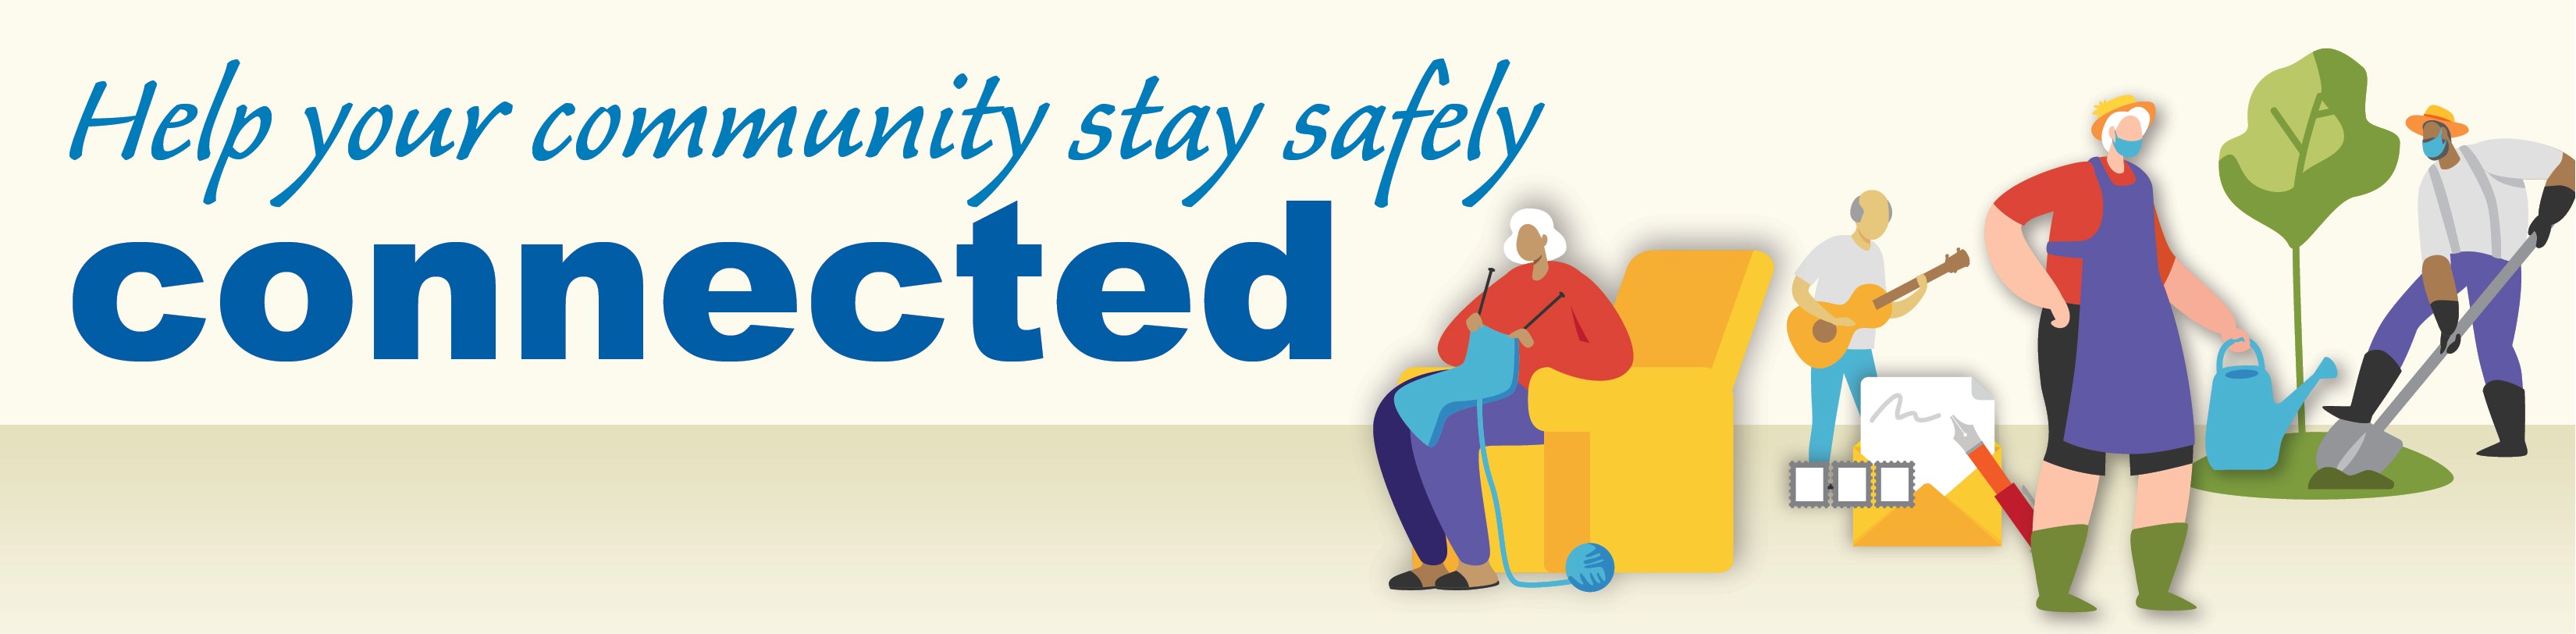 Help your community stay safely connected